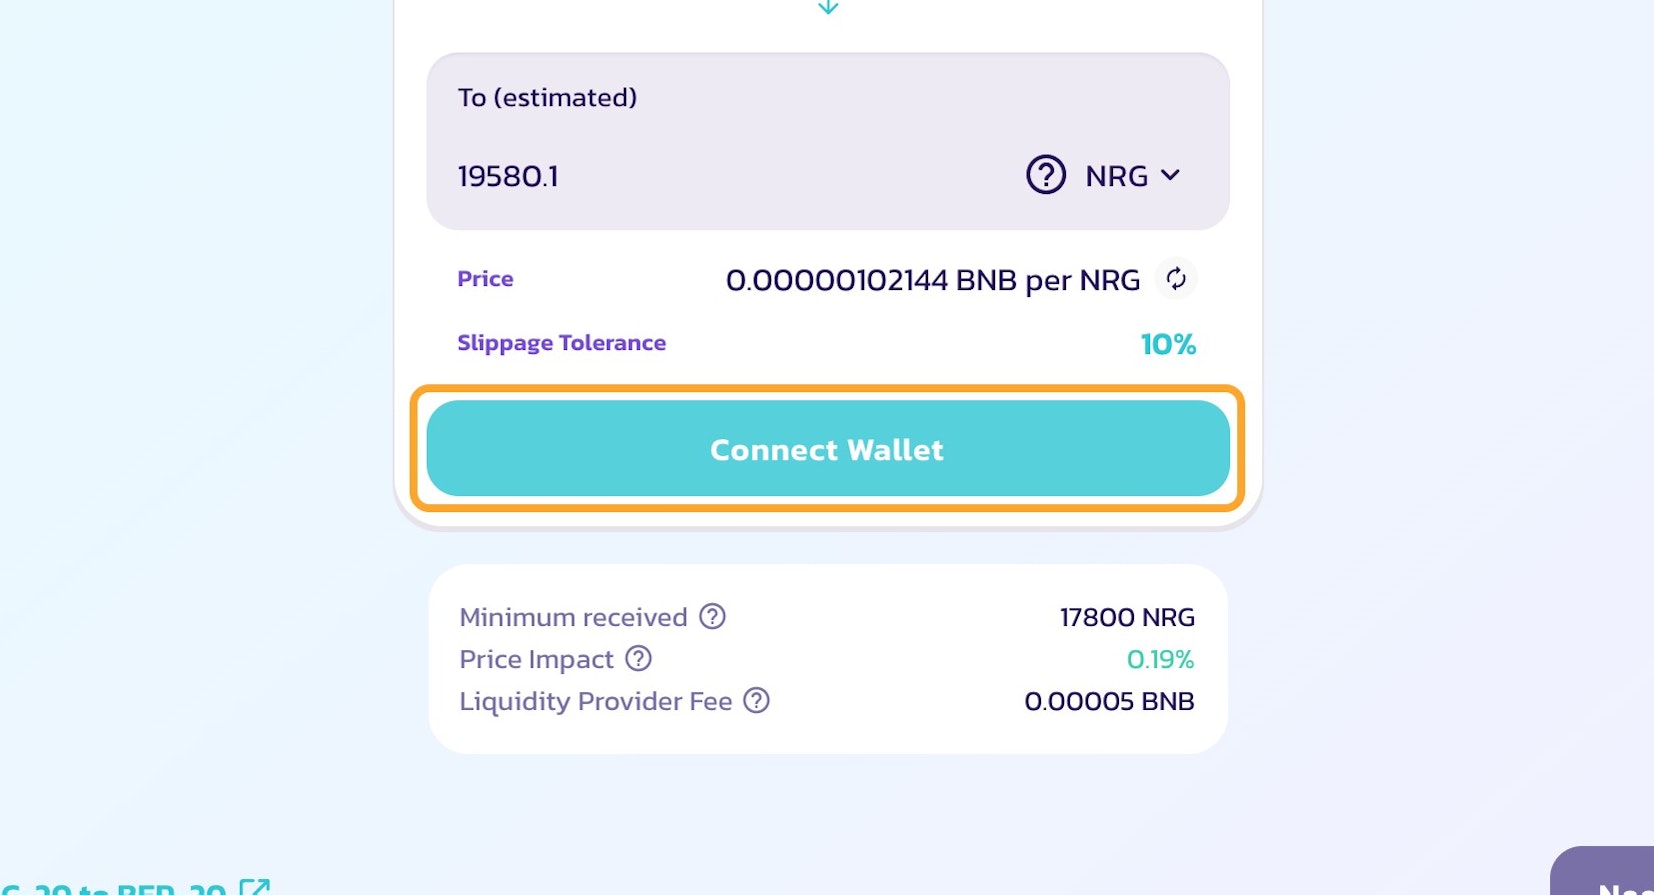 Click on Connect Wallet